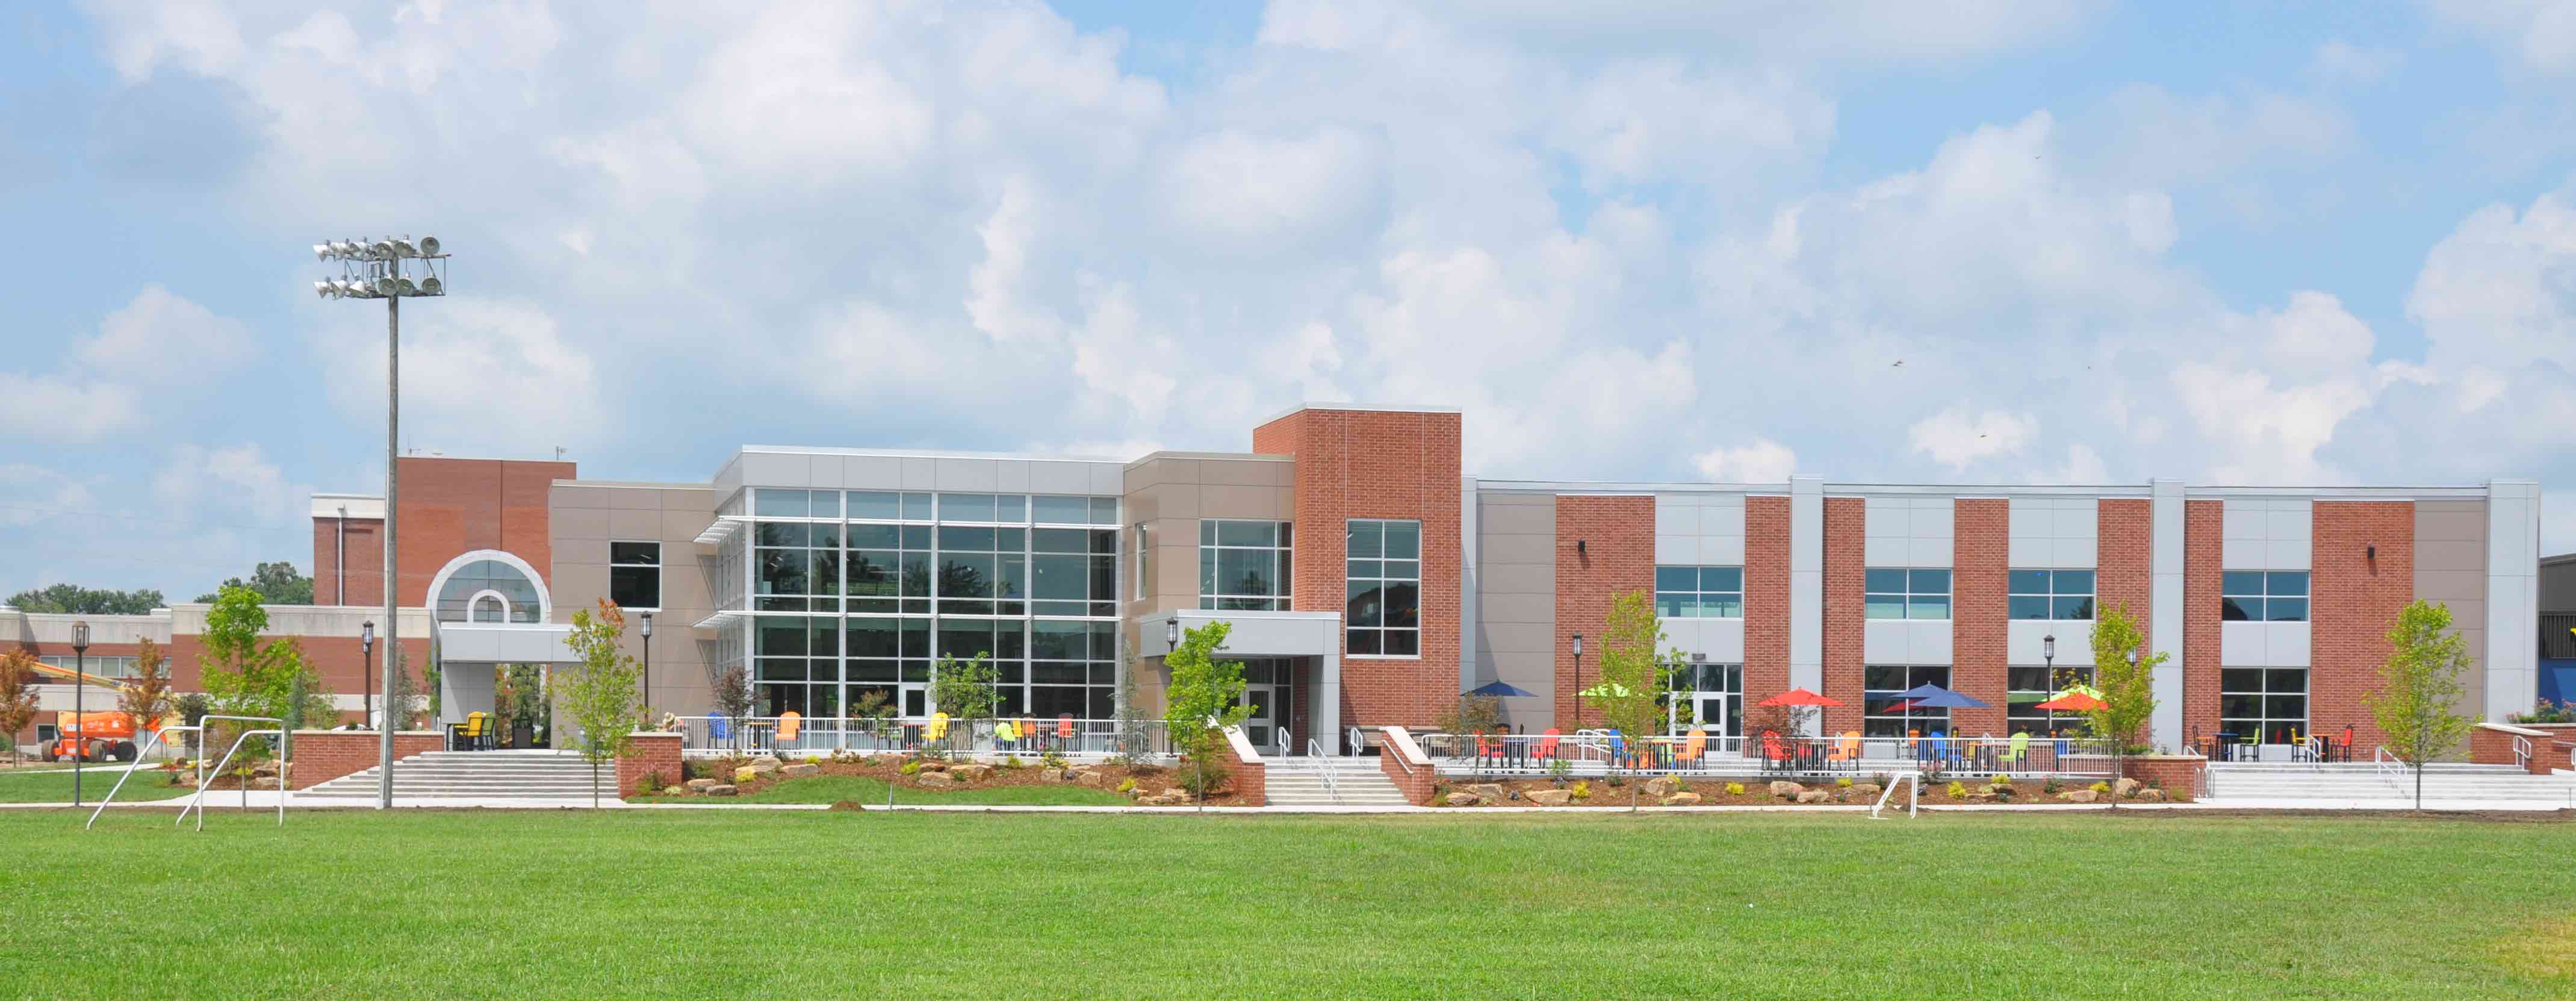 new-student-center-to-transform-life-on-vincennes-university-campus